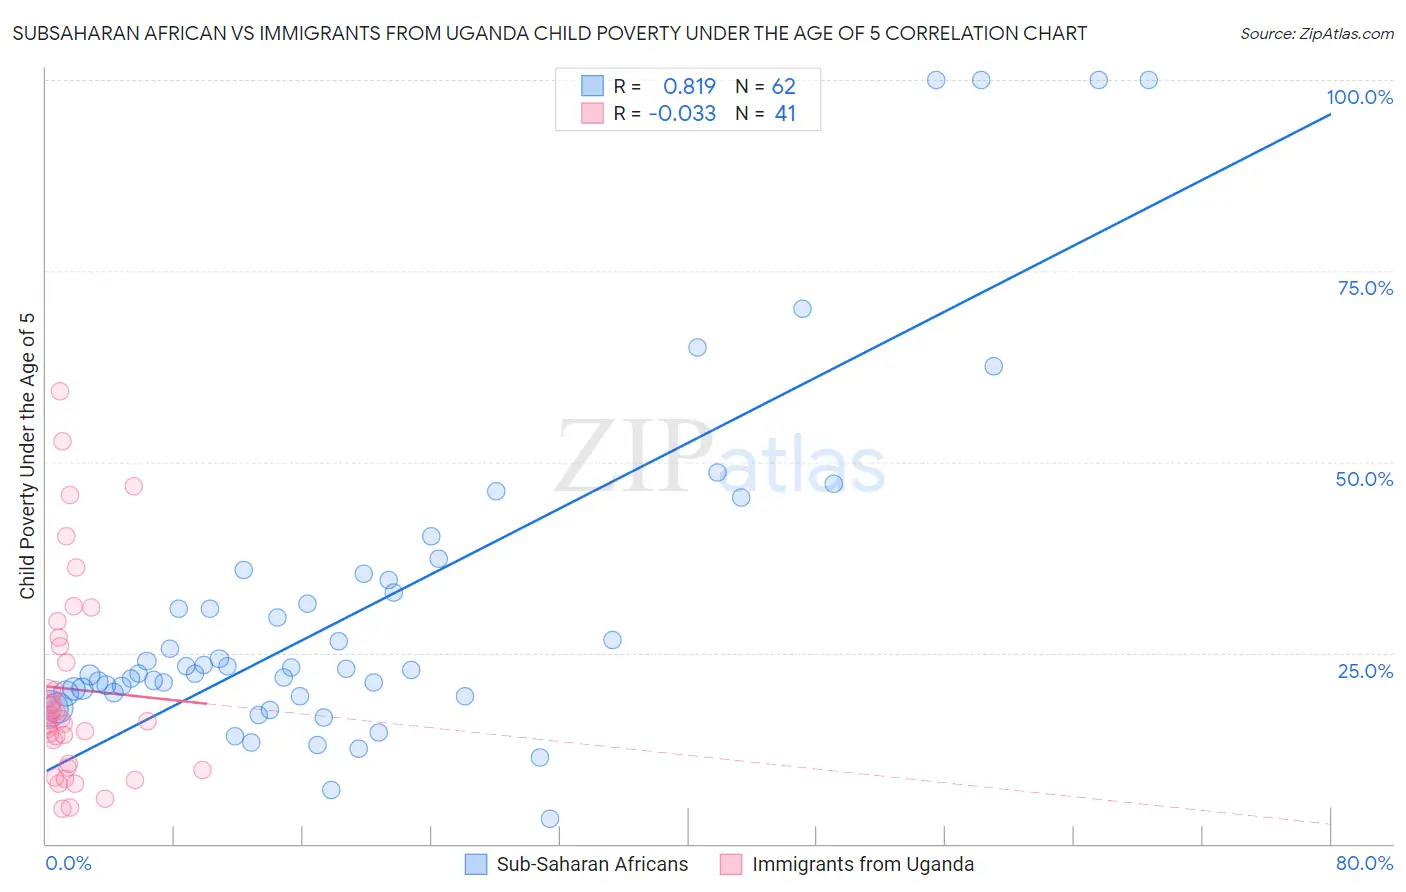 Subsaharan African vs Immigrants from Uganda Child Poverty Under the Age of 5